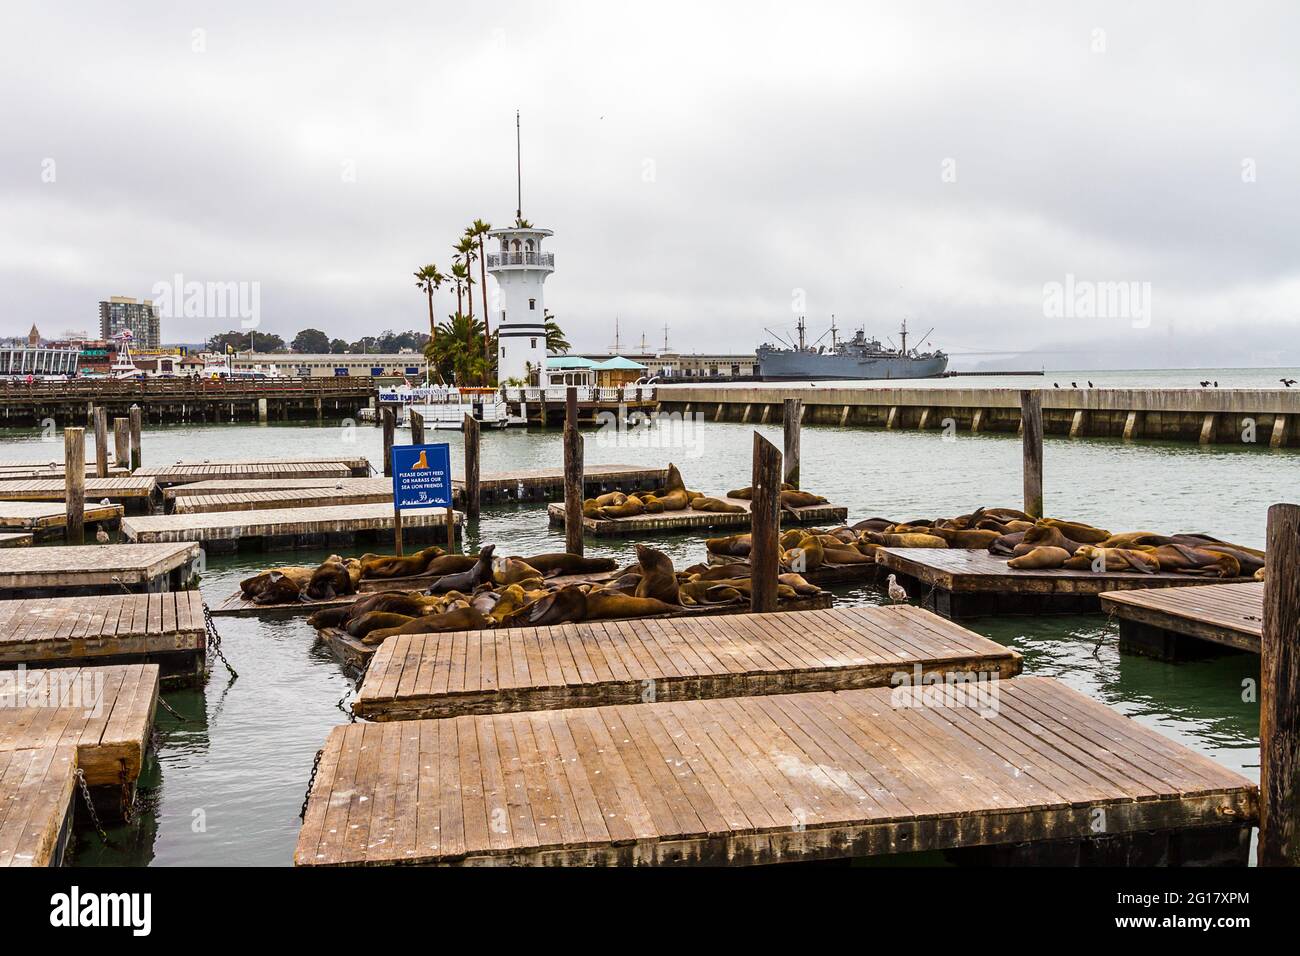 Wide angle image of the sea lions of the famous K-Dock on Pier 39 in San Francisco Stock Photo